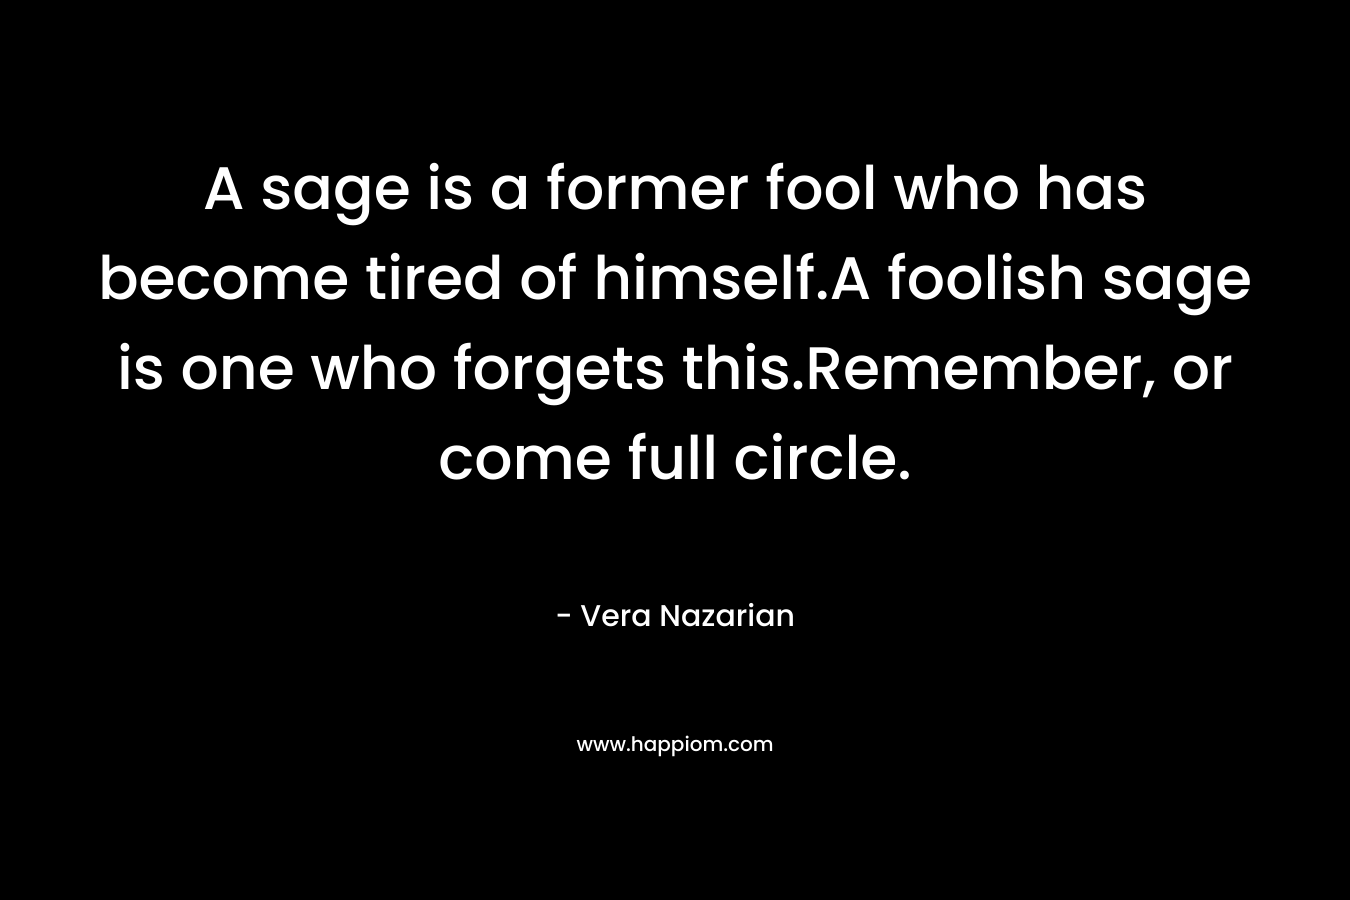 A sage is a former fool who has become tired of himself.A foolish sage is one who forgets this.Remember, or come full circle.